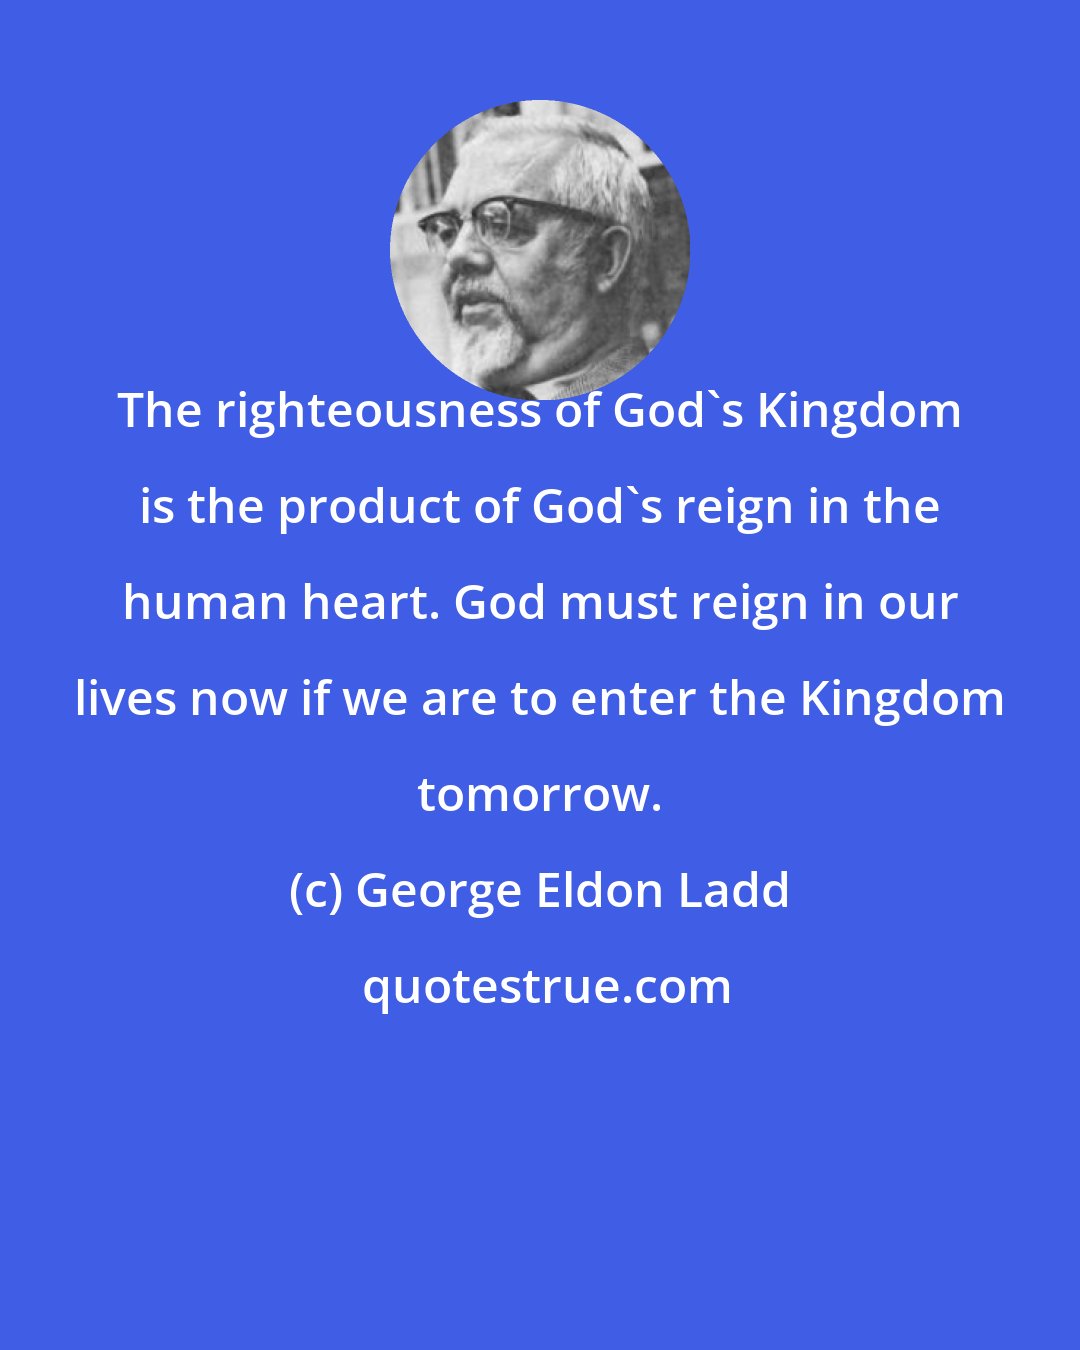 George Eldon Ladd: The righteousness of God's Kingdom is the product of God's reign in the human heart. God must reign in our lives now if we are to enter the Kingdom tomorrow.